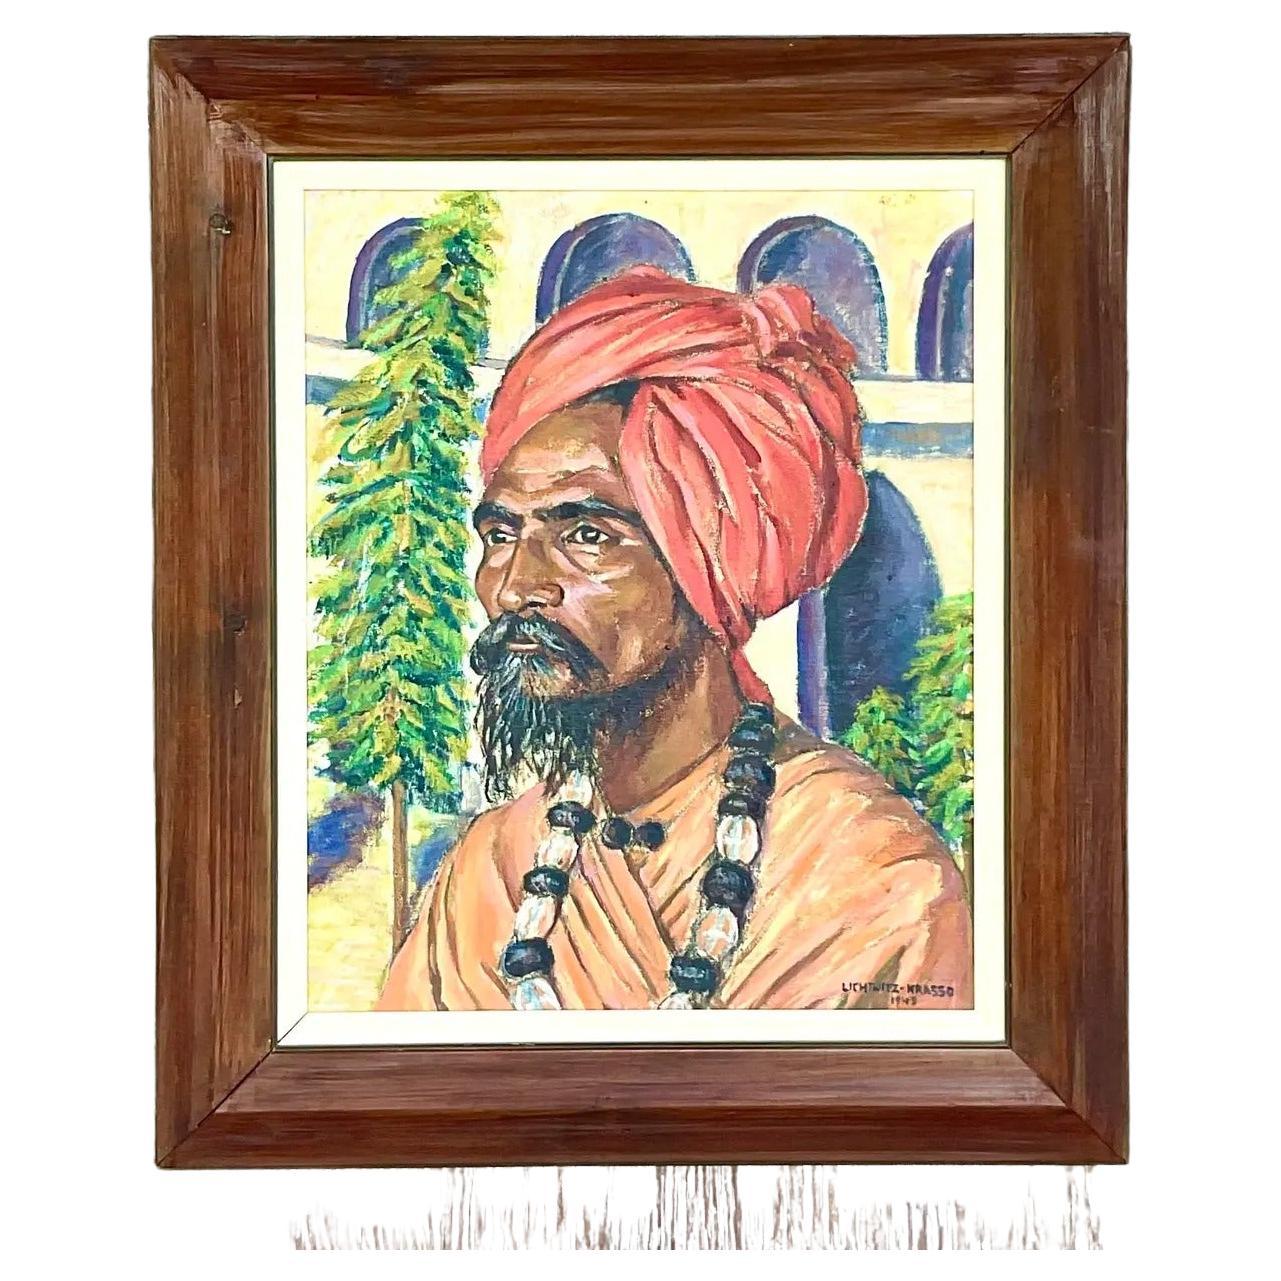 Vintage Boho Signed 1941 Original Oil Painting of Man in Turban For Sale